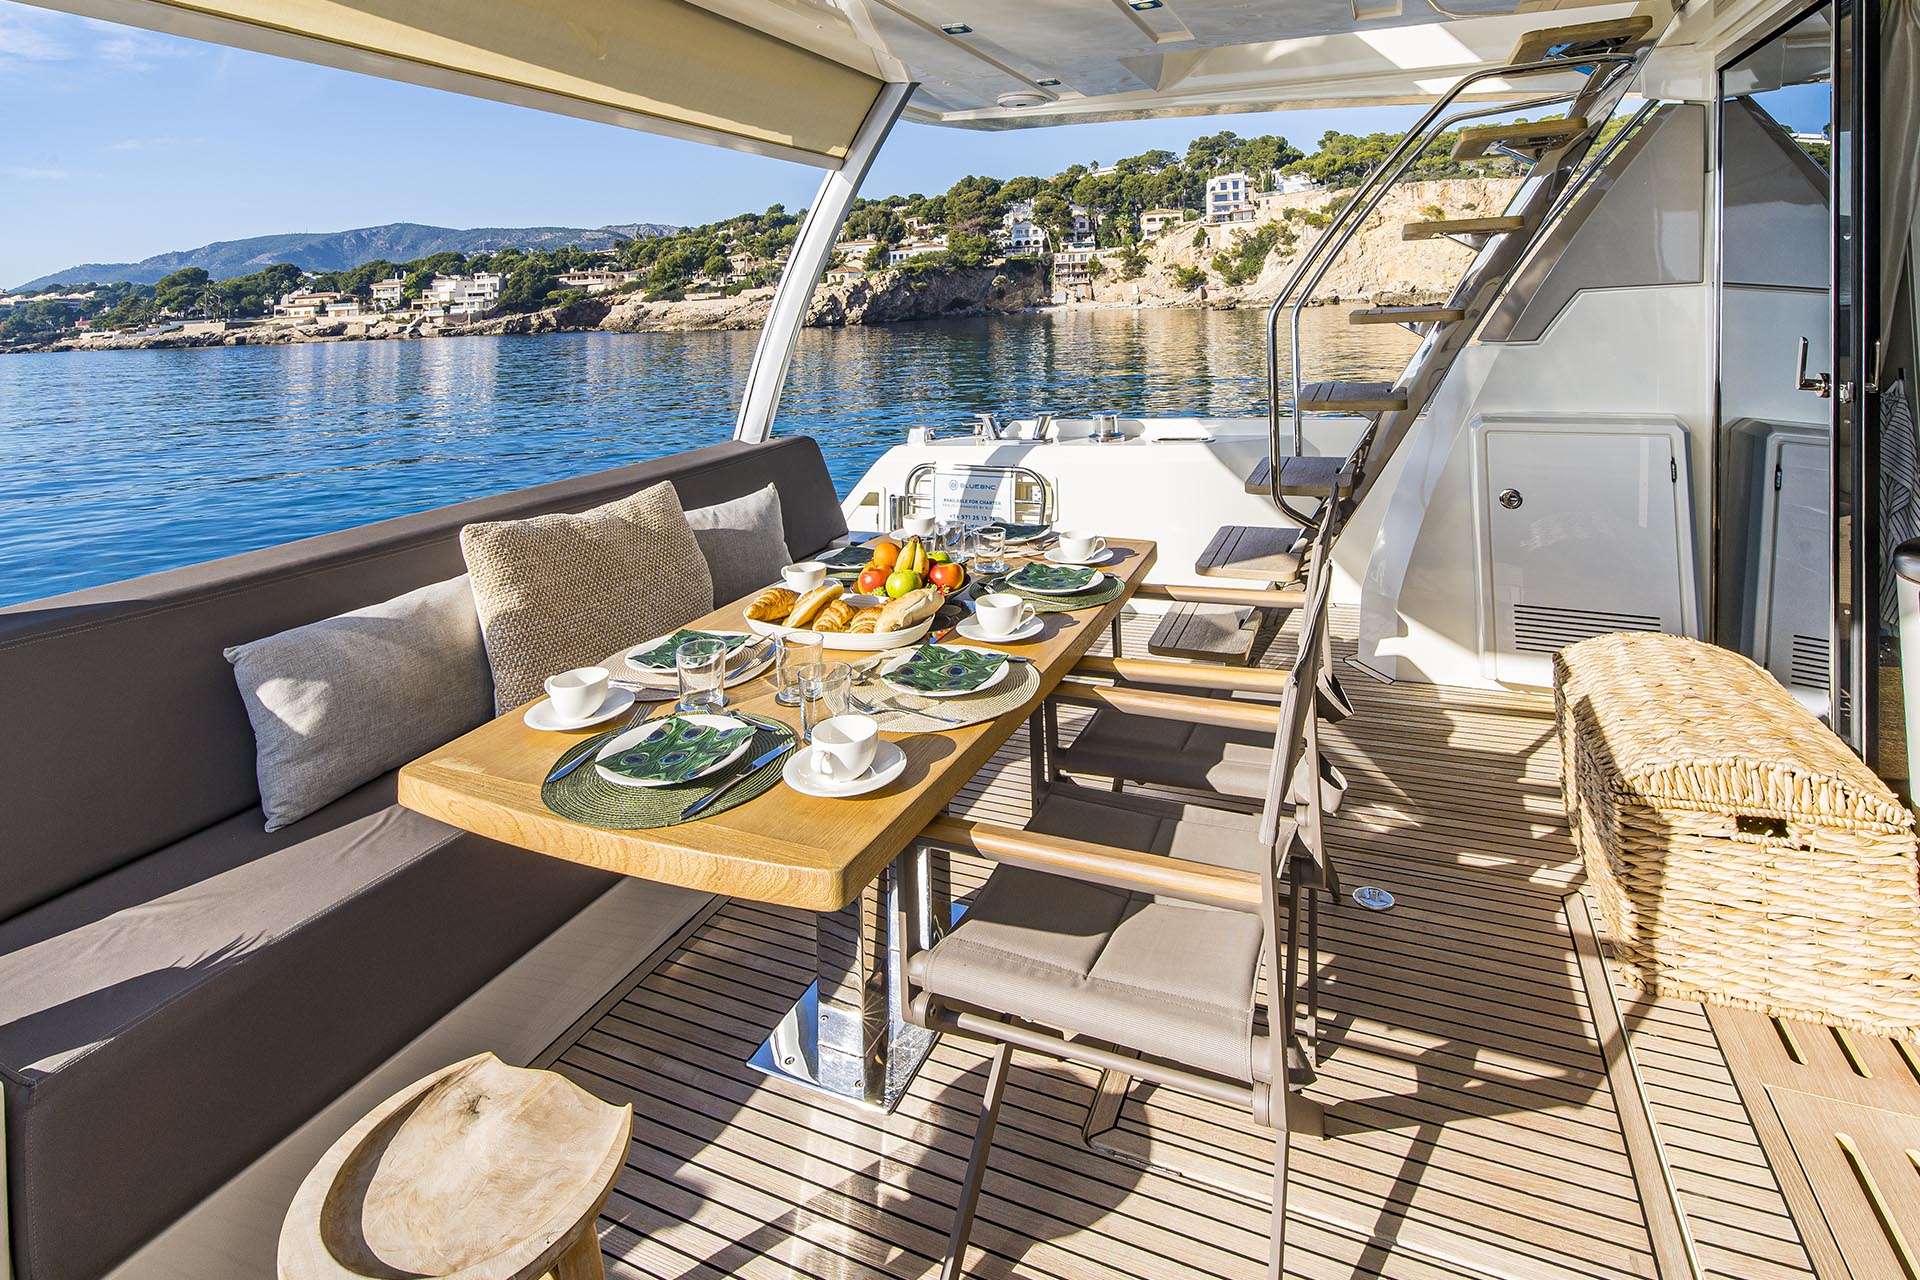 BLUE M - Yacht Charter Siracusa & Boat hire in W. Med -Naples/Sicily, W. Med -Riviera/Cors/Sard., W. Med - Spain/Balearics | Winter: Caribbean Virgin Islands (US/BVI), Caribbean Leewards, Caribbean Windwards 3